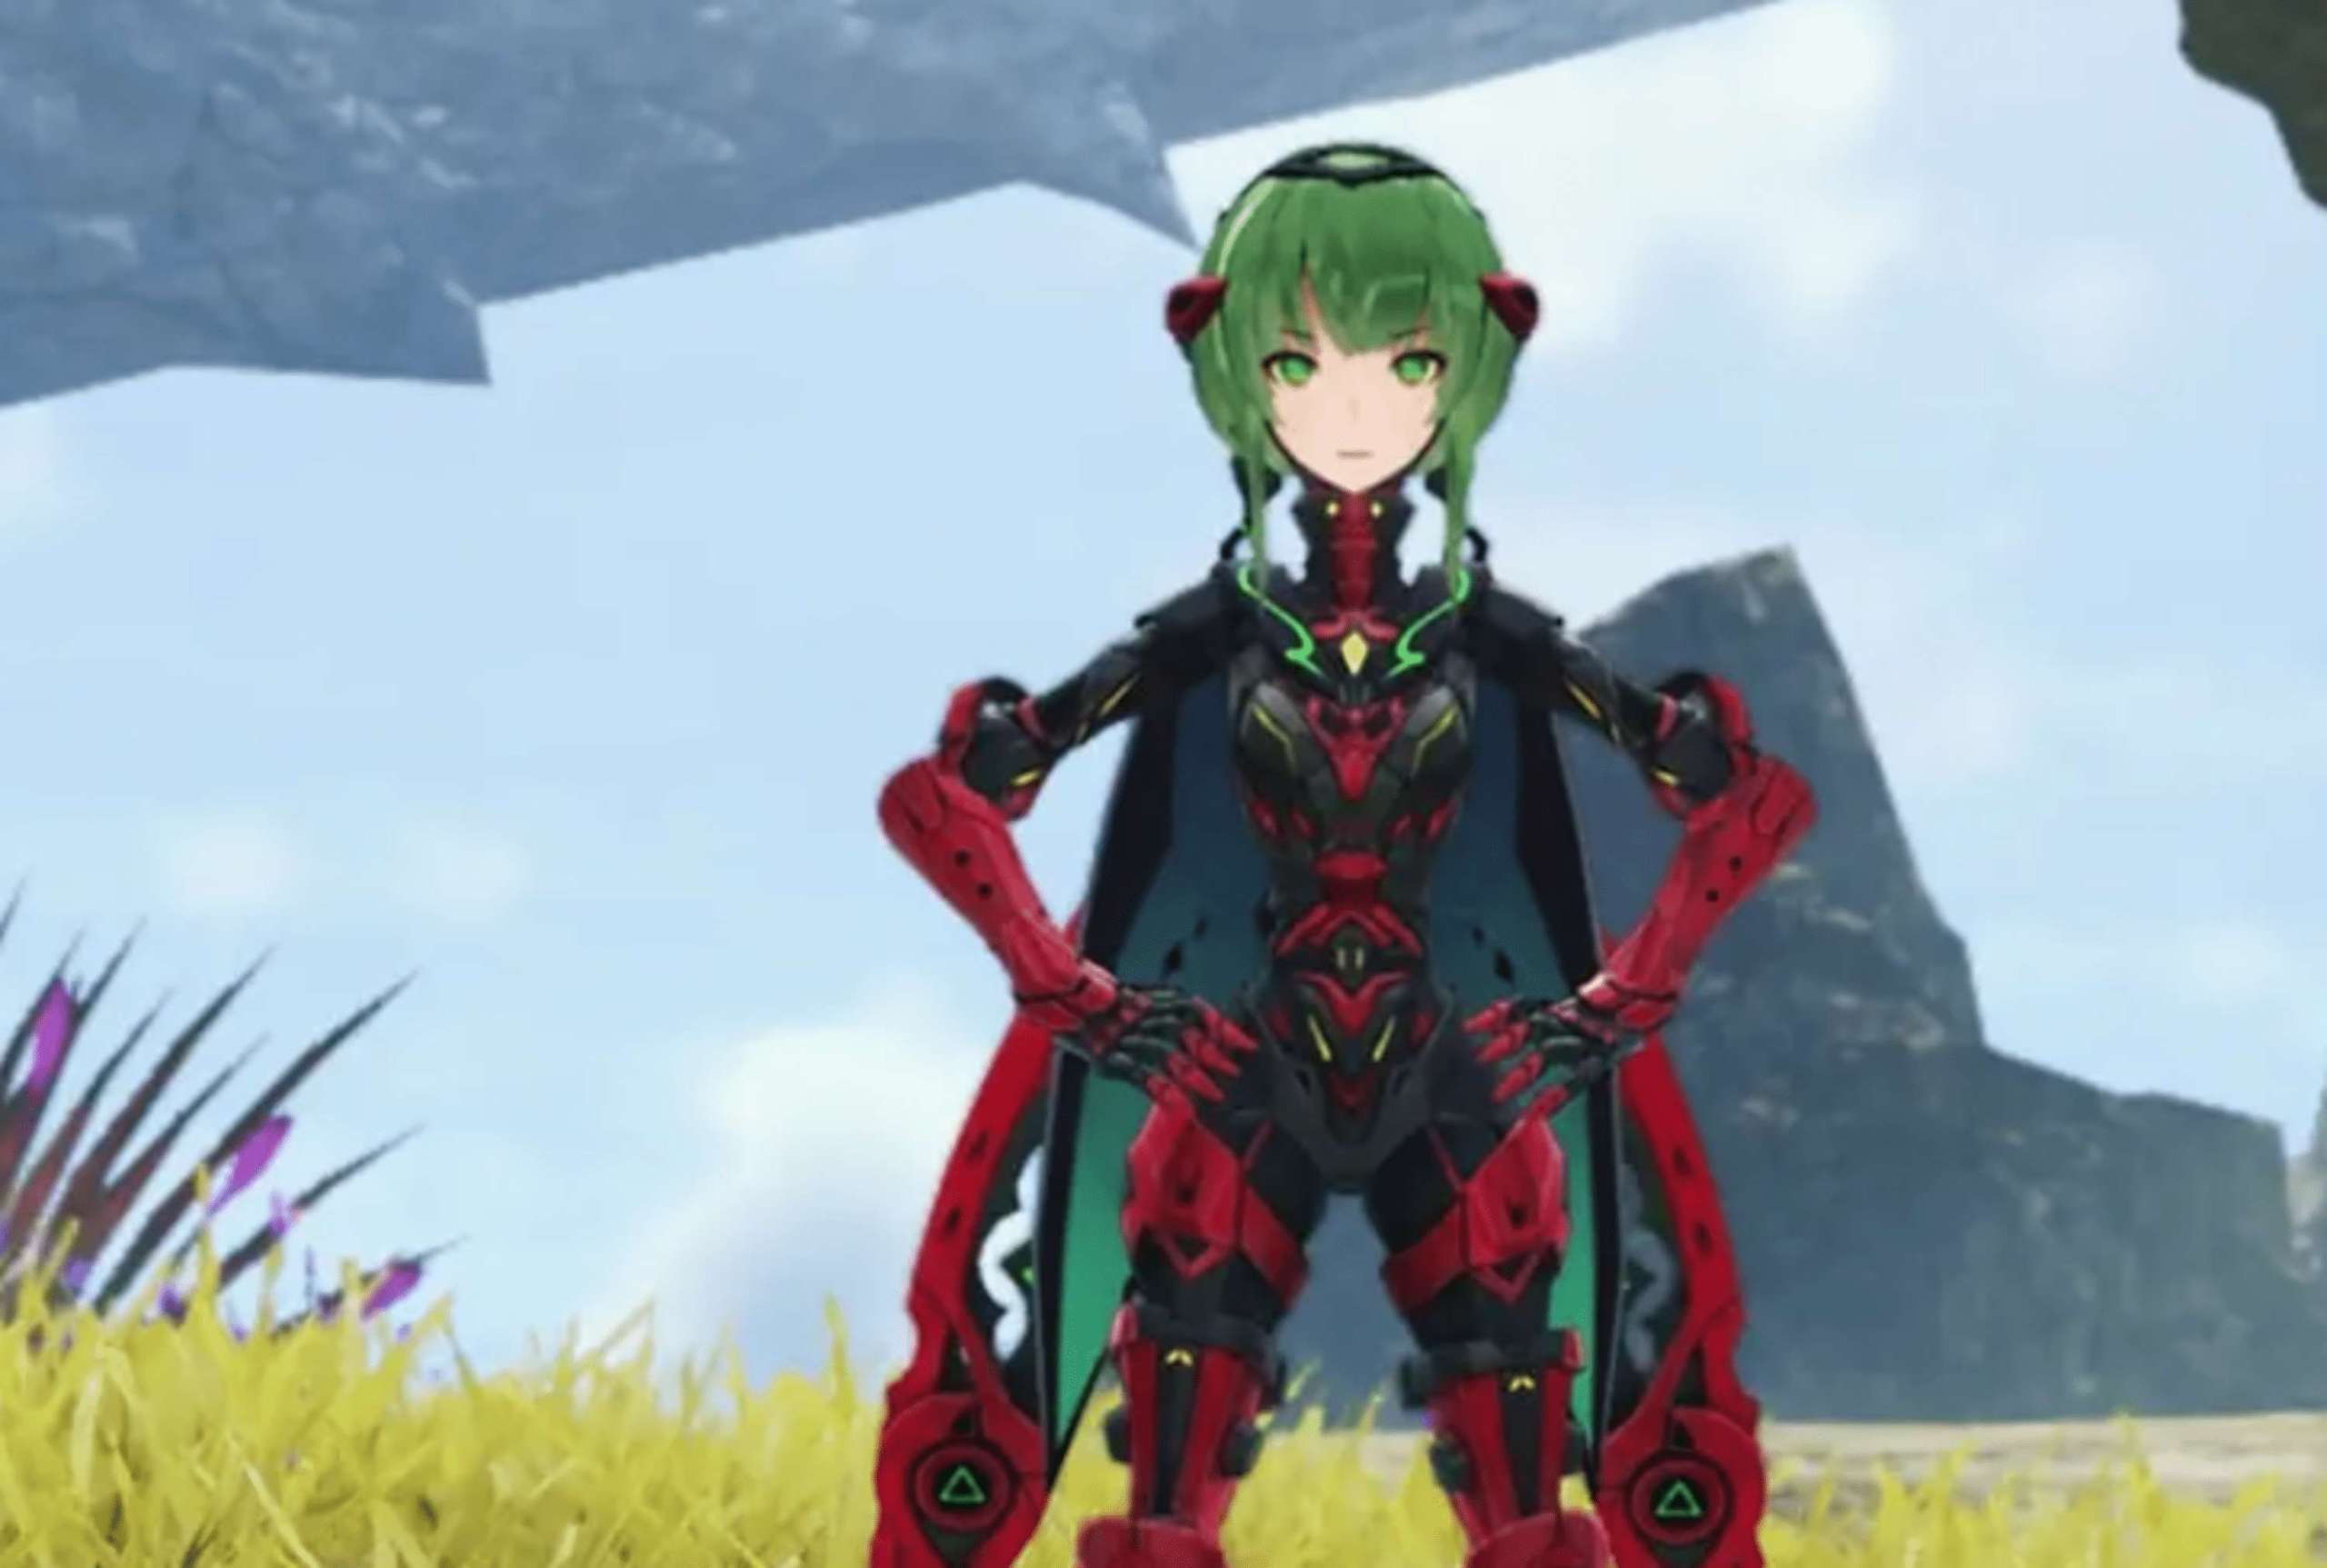 A New Update For Xenoblade Chronicles 3 Has Been Launched, Along With Latest Update